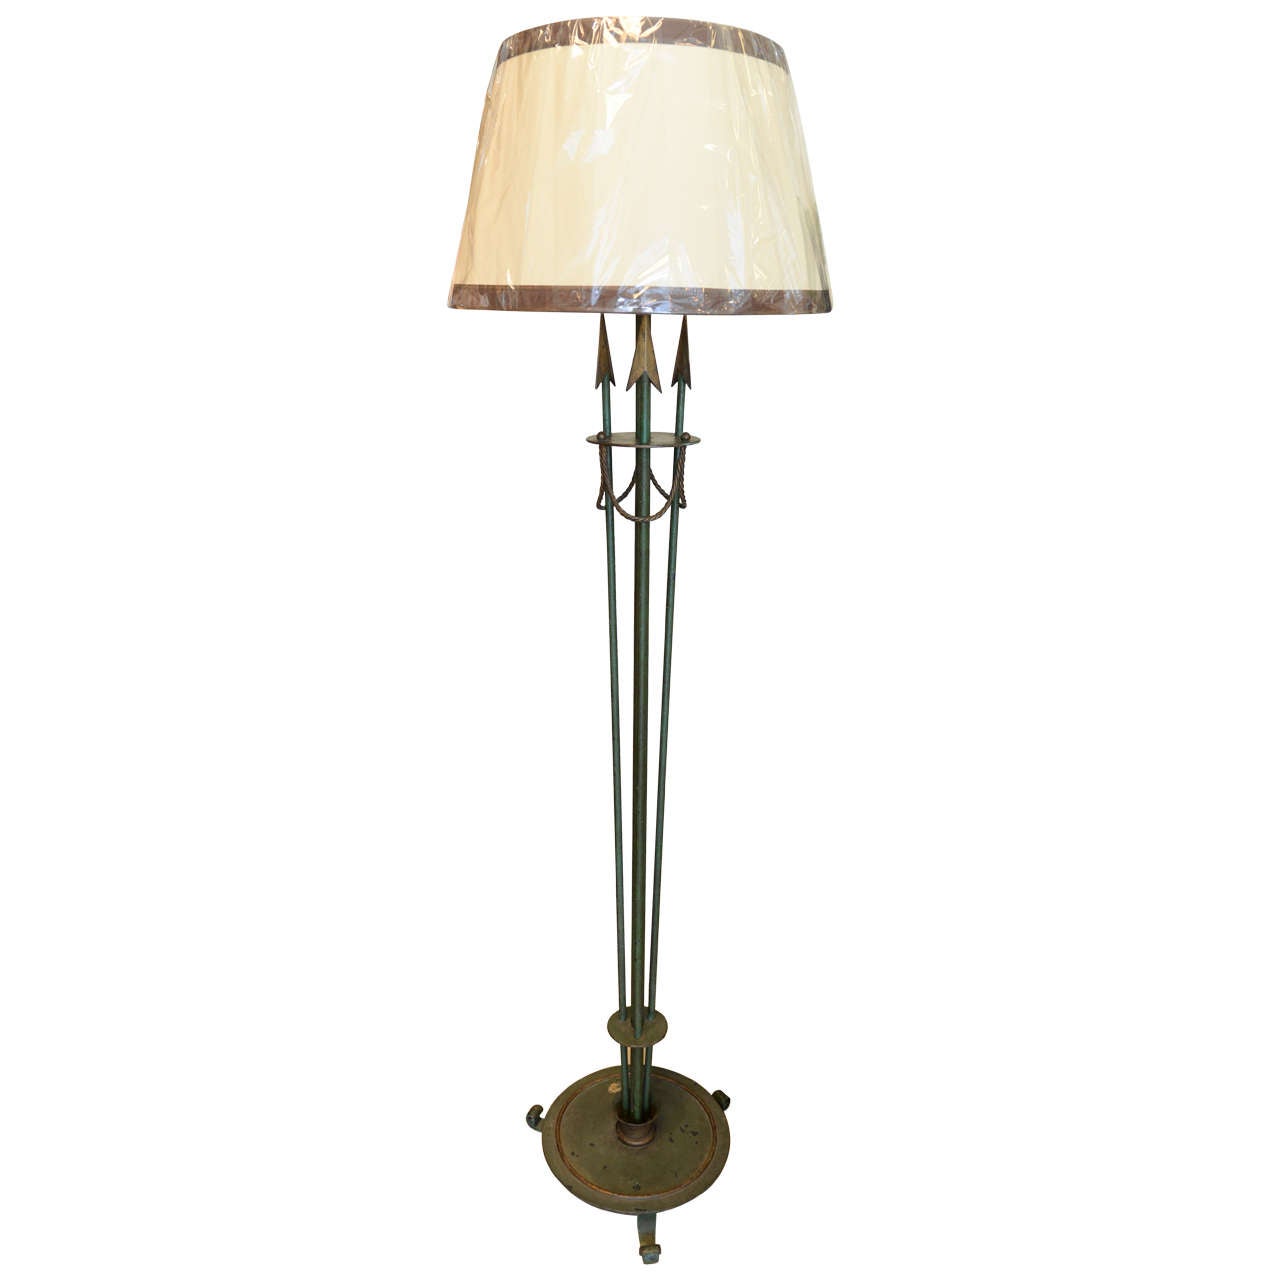 Vintage French Art Deco Style Iron  Floor Lamp, Circa 1940 For Sale